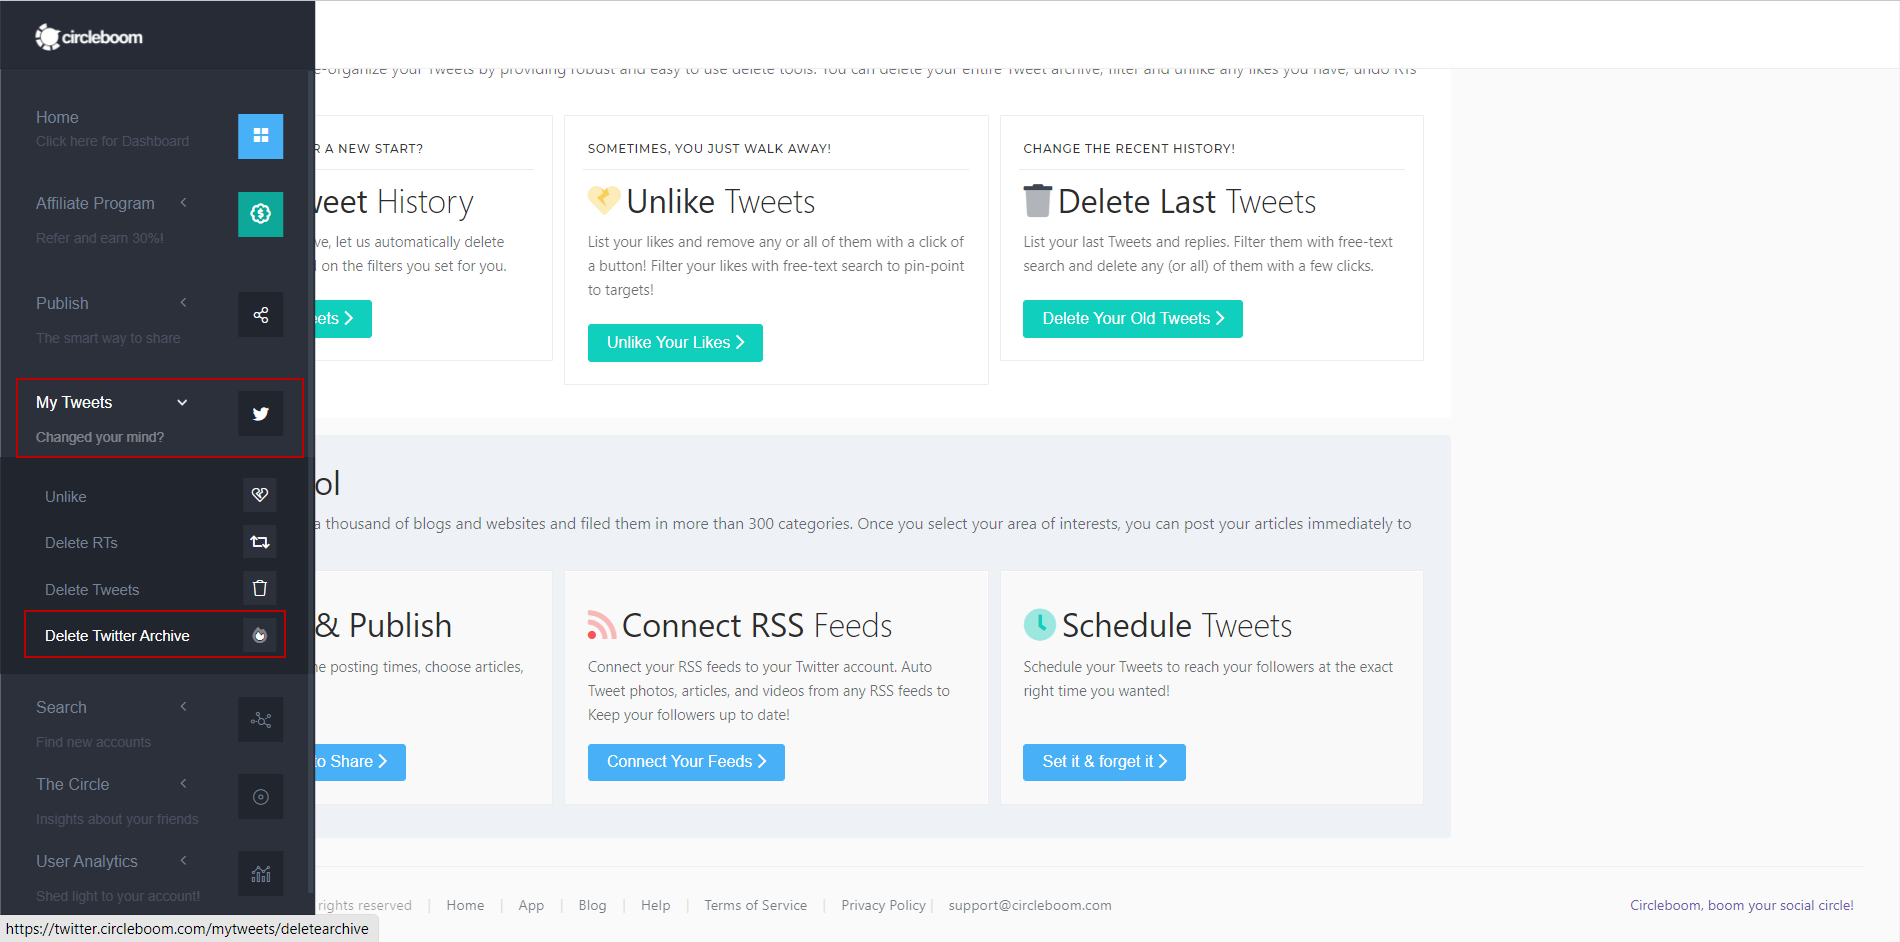 Once you have downloaded your Twitter archive, you can delete all media tweets in seconds!